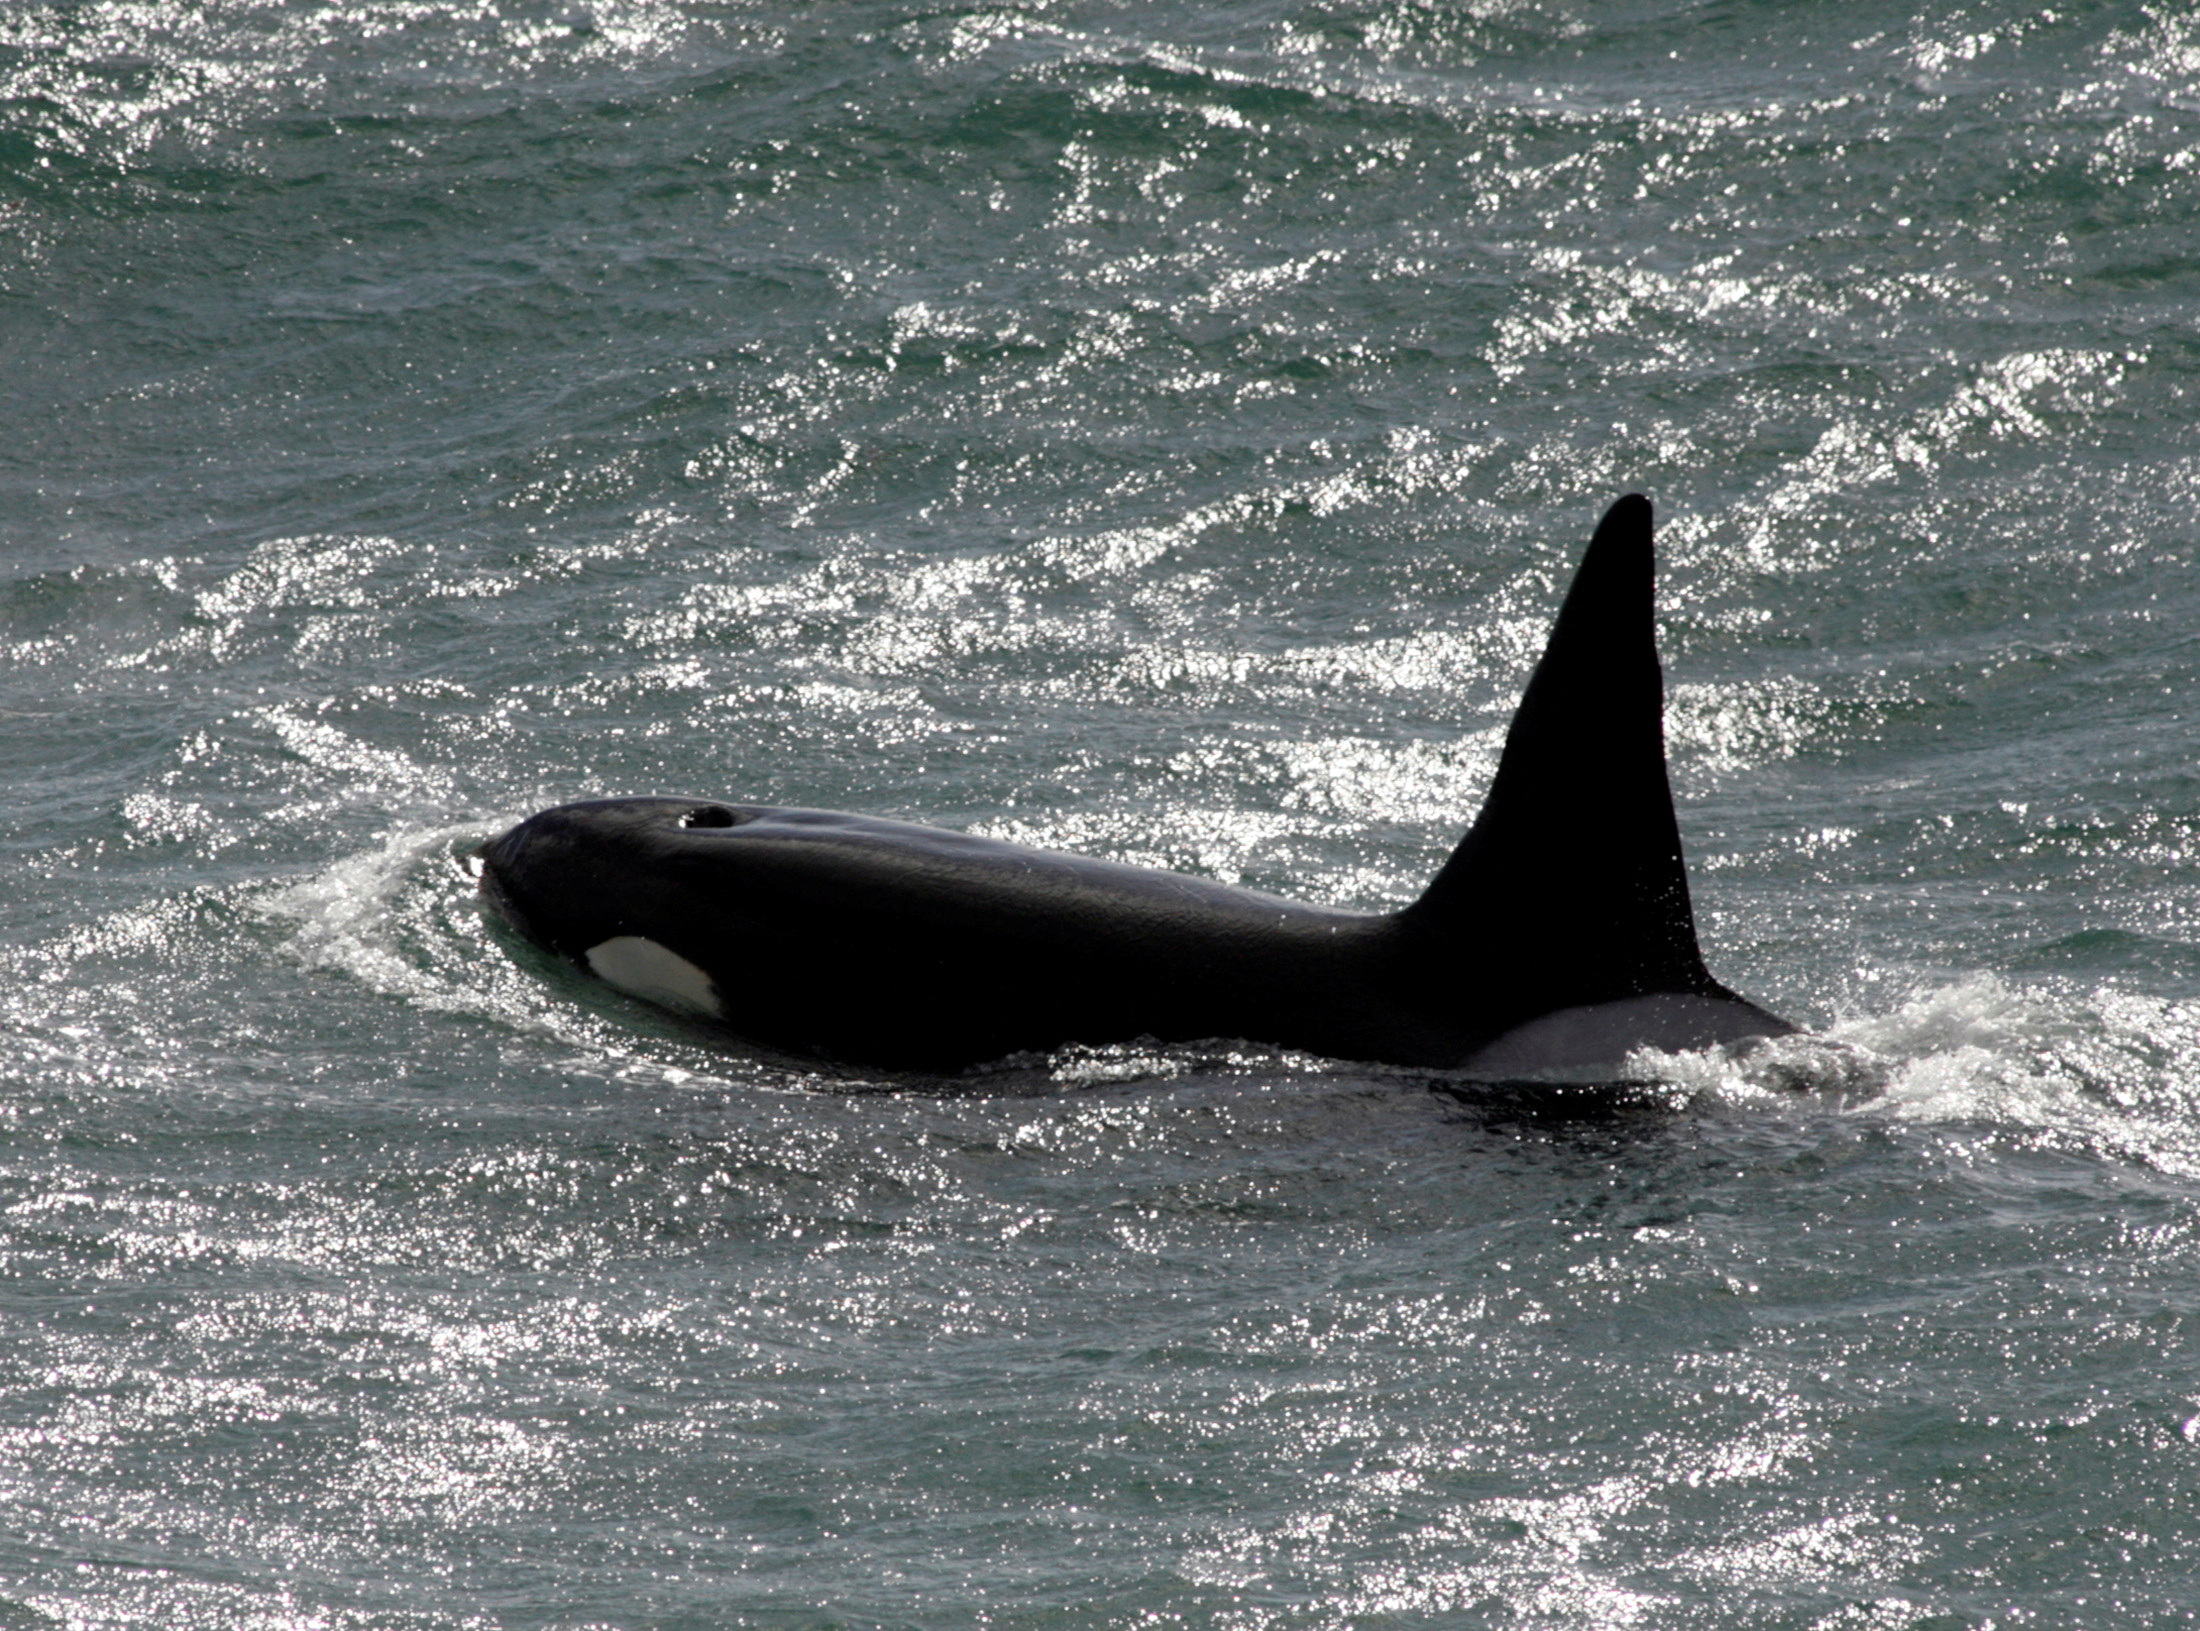 To match feature ARGENTINA-ORCAS/